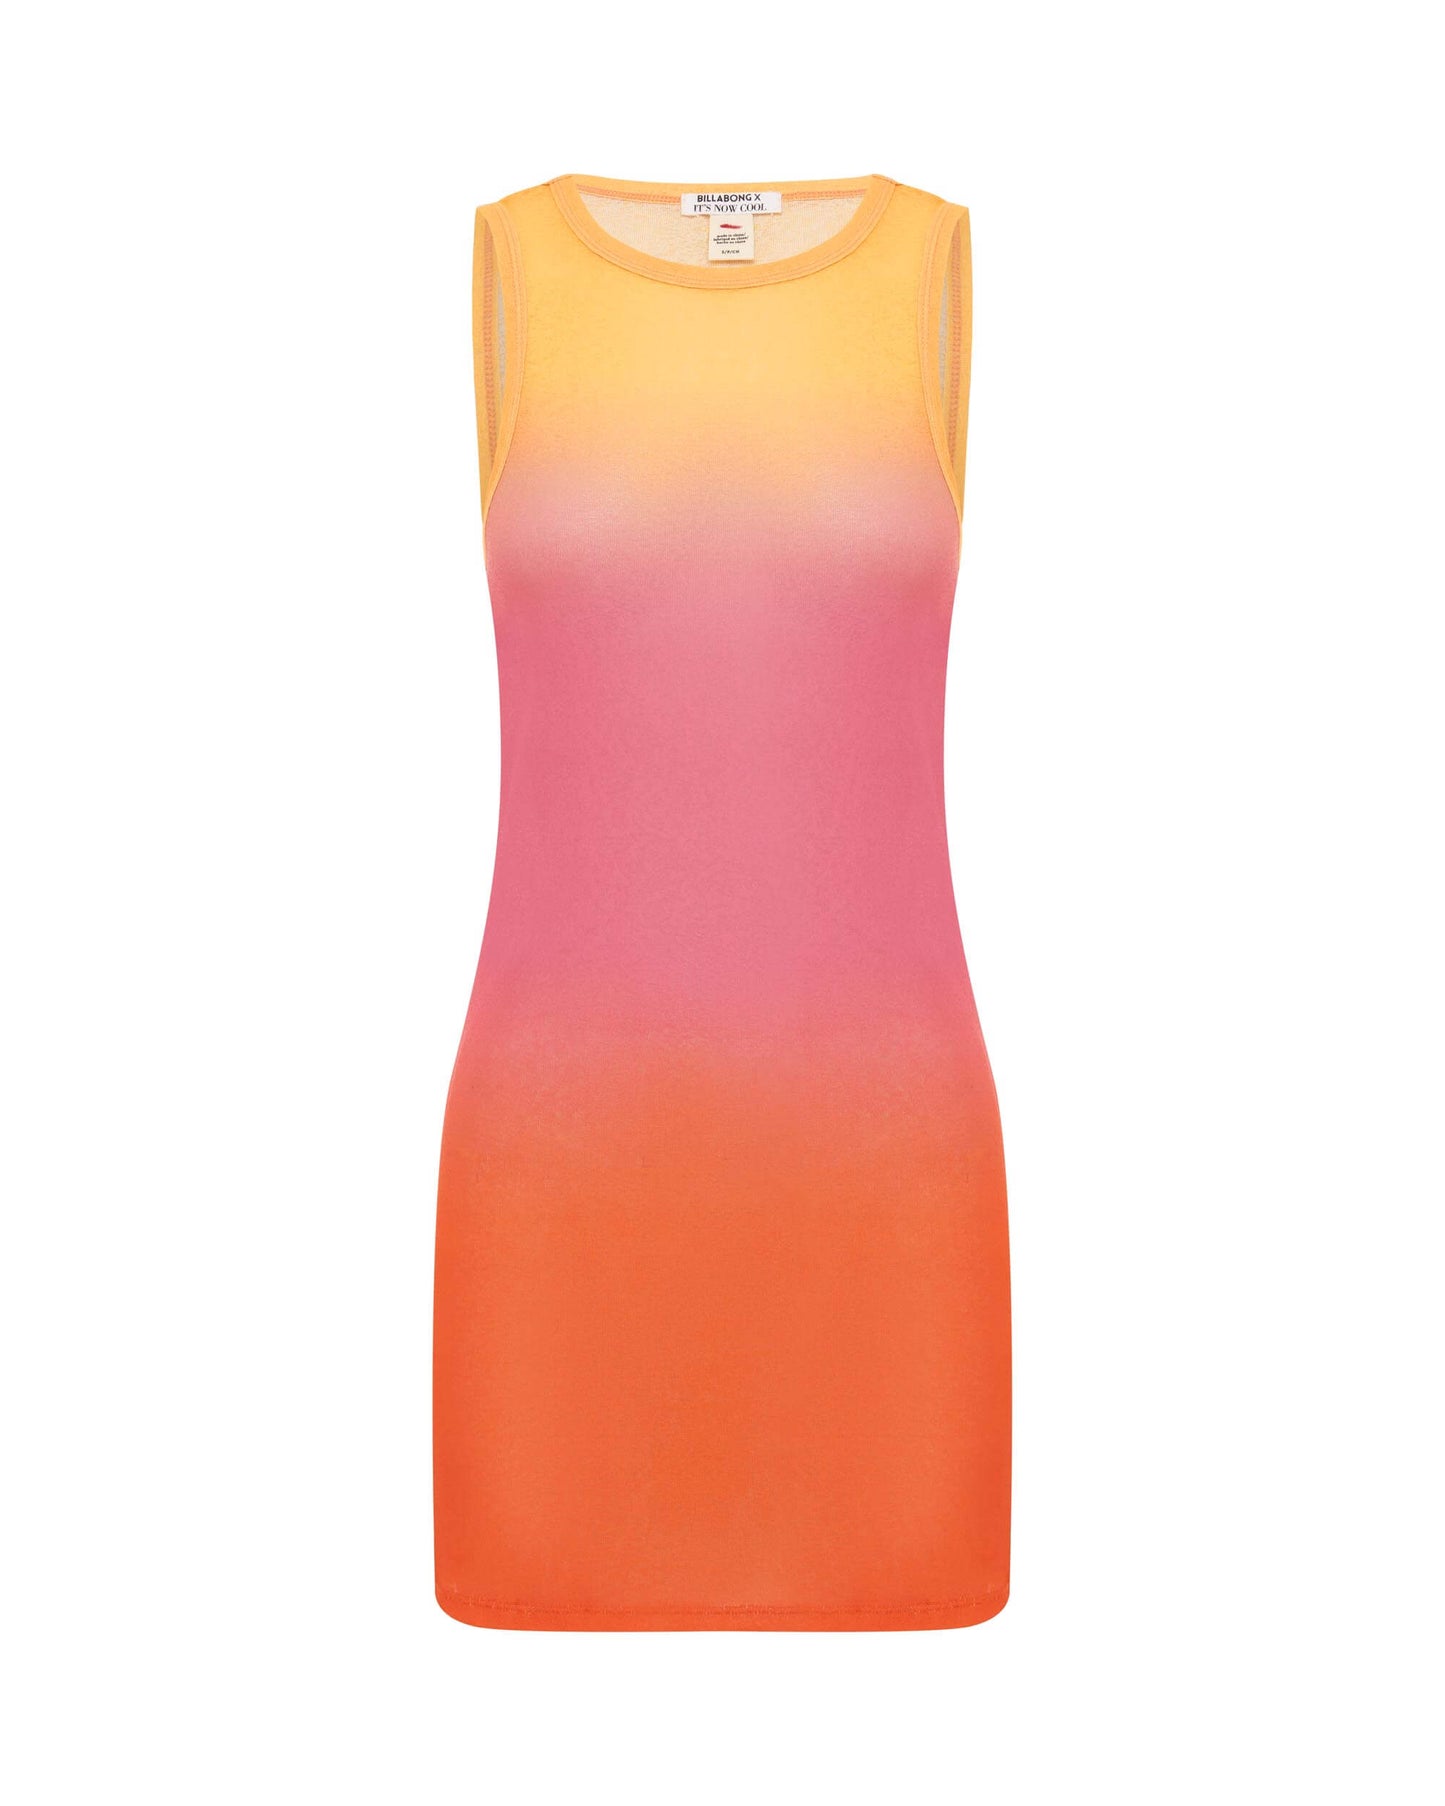 Its now cool DRESS(4FRONT) OCASO TANK DRESS - CORAL CRAZE in Coral Craze